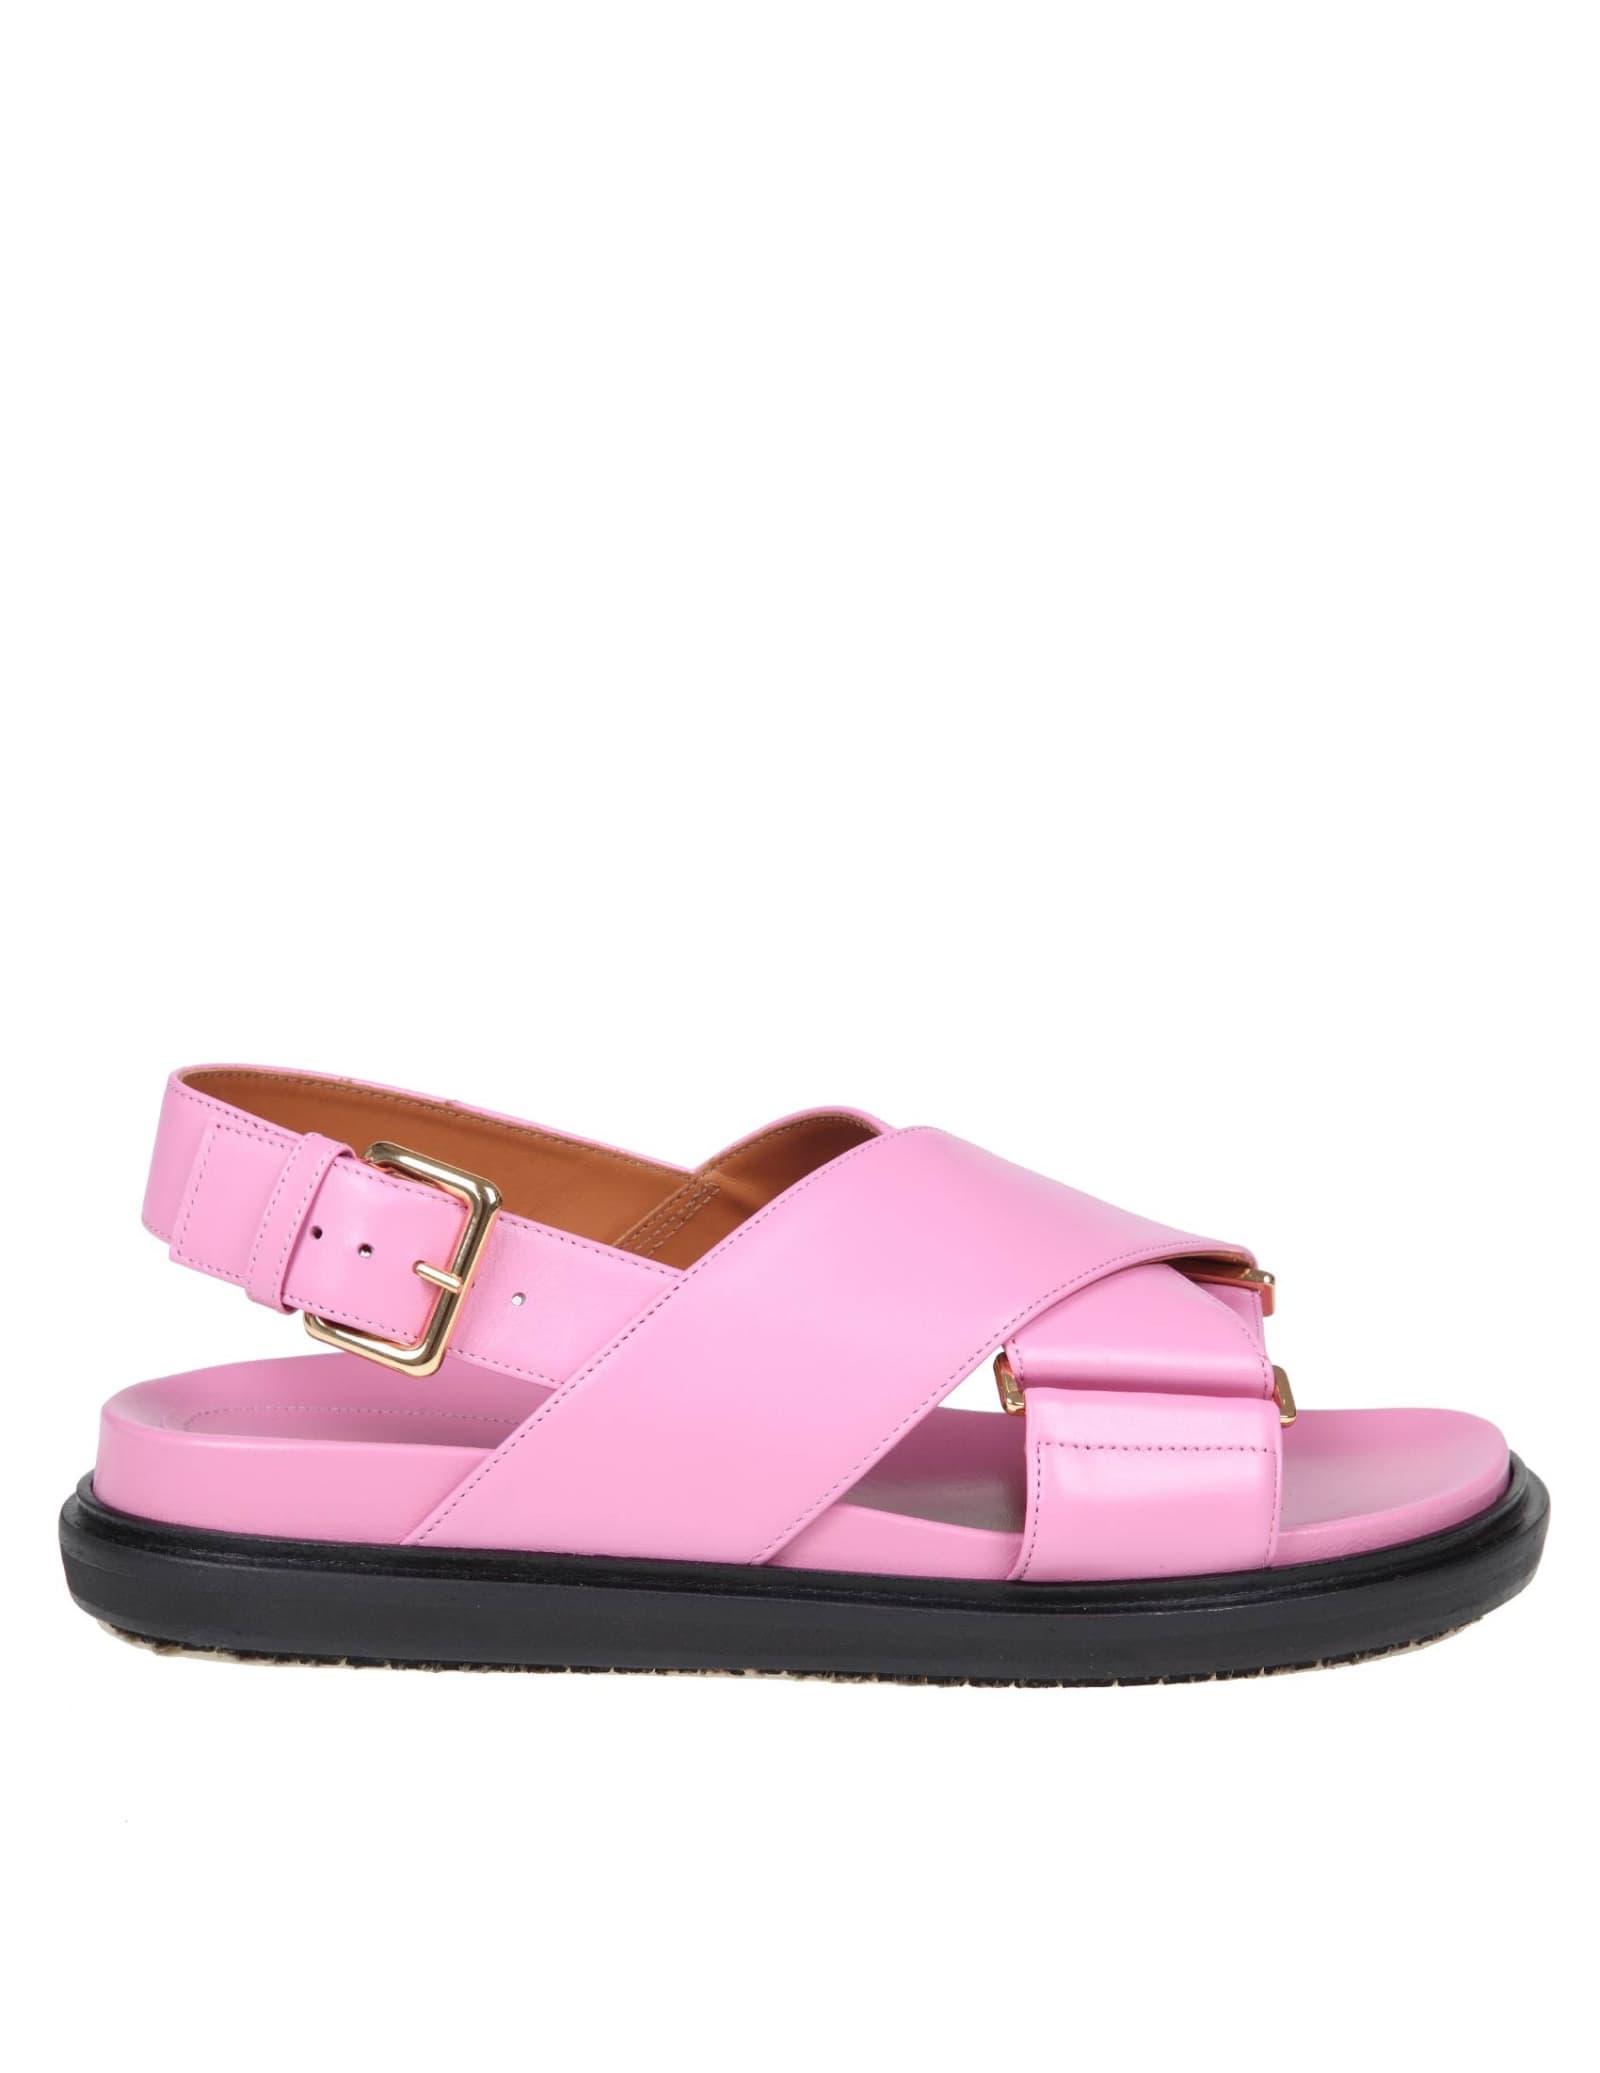 MARNI FUSSBETT SANDAL IN PINK COLOR LEATHER